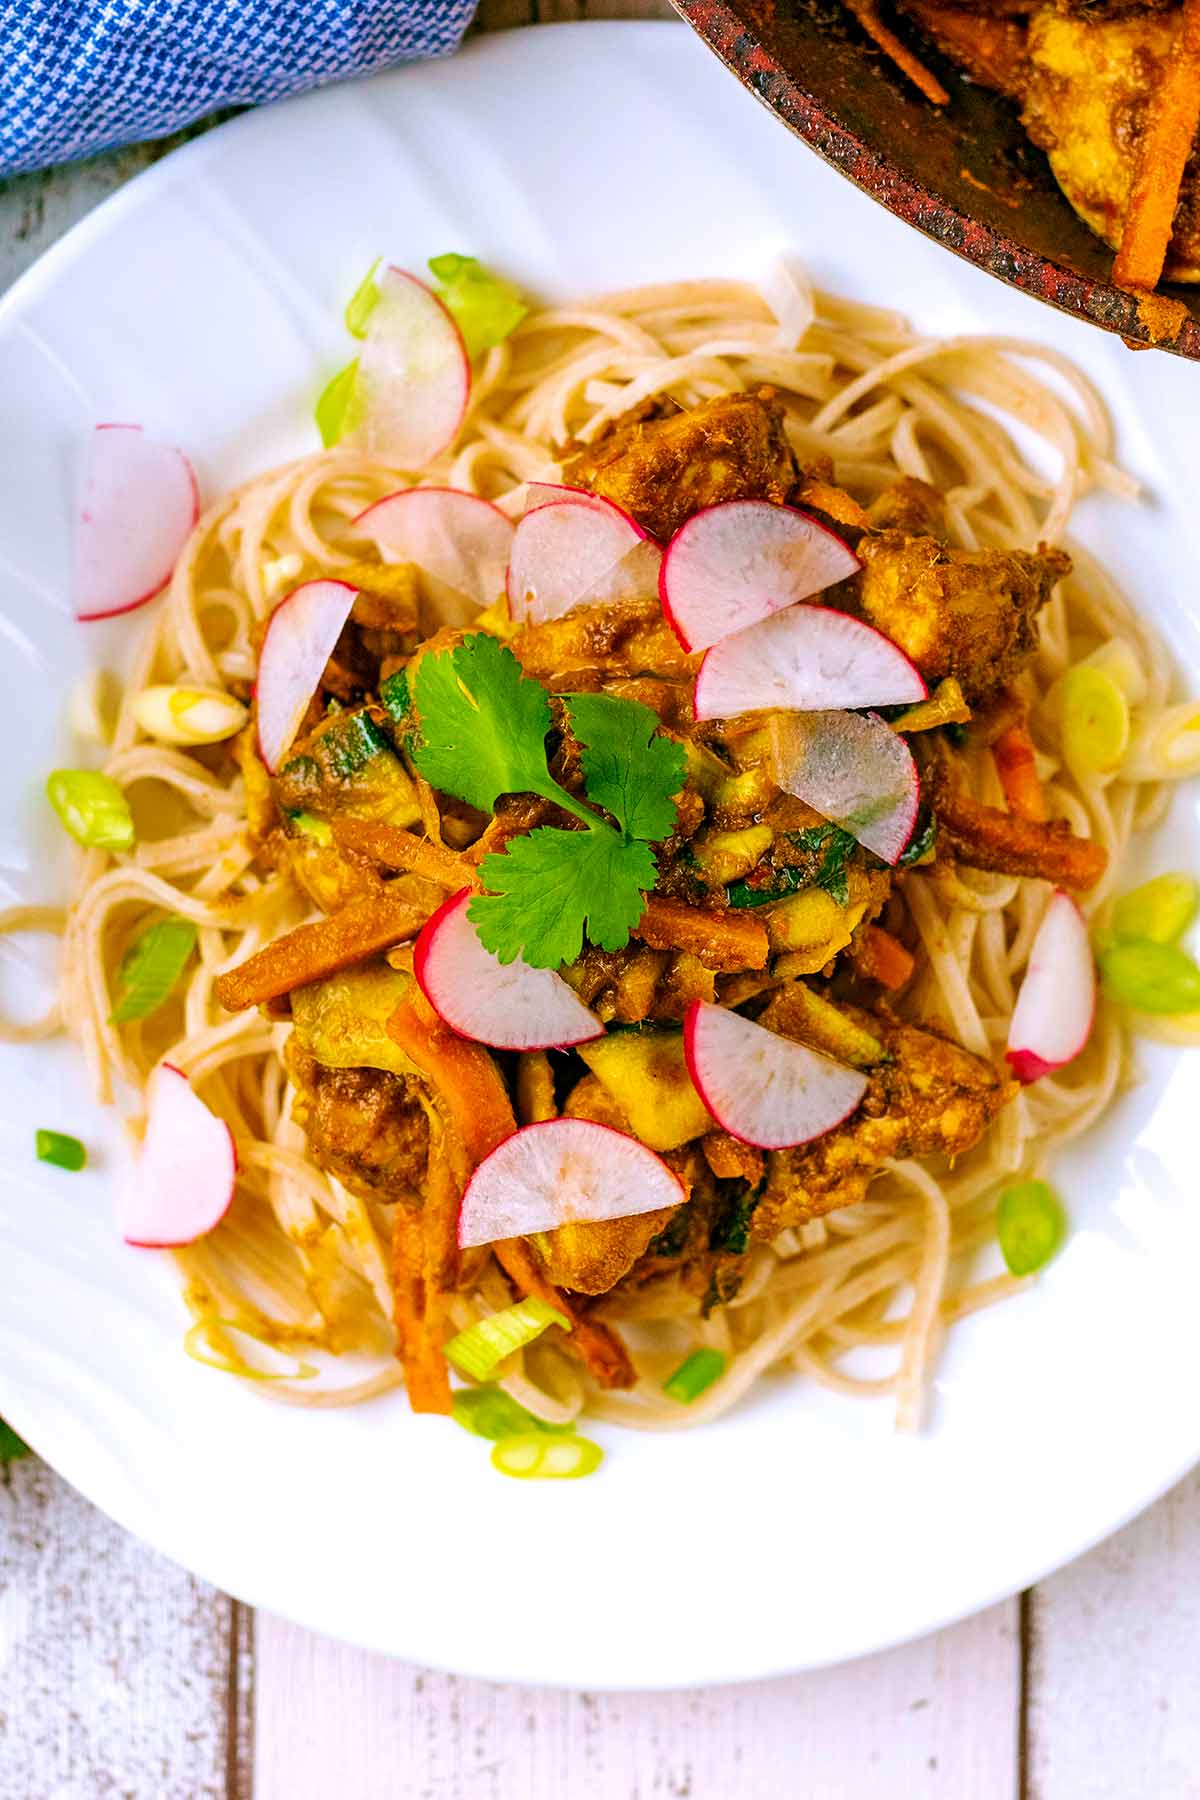 Thai Chicken Noodles served on a plate.